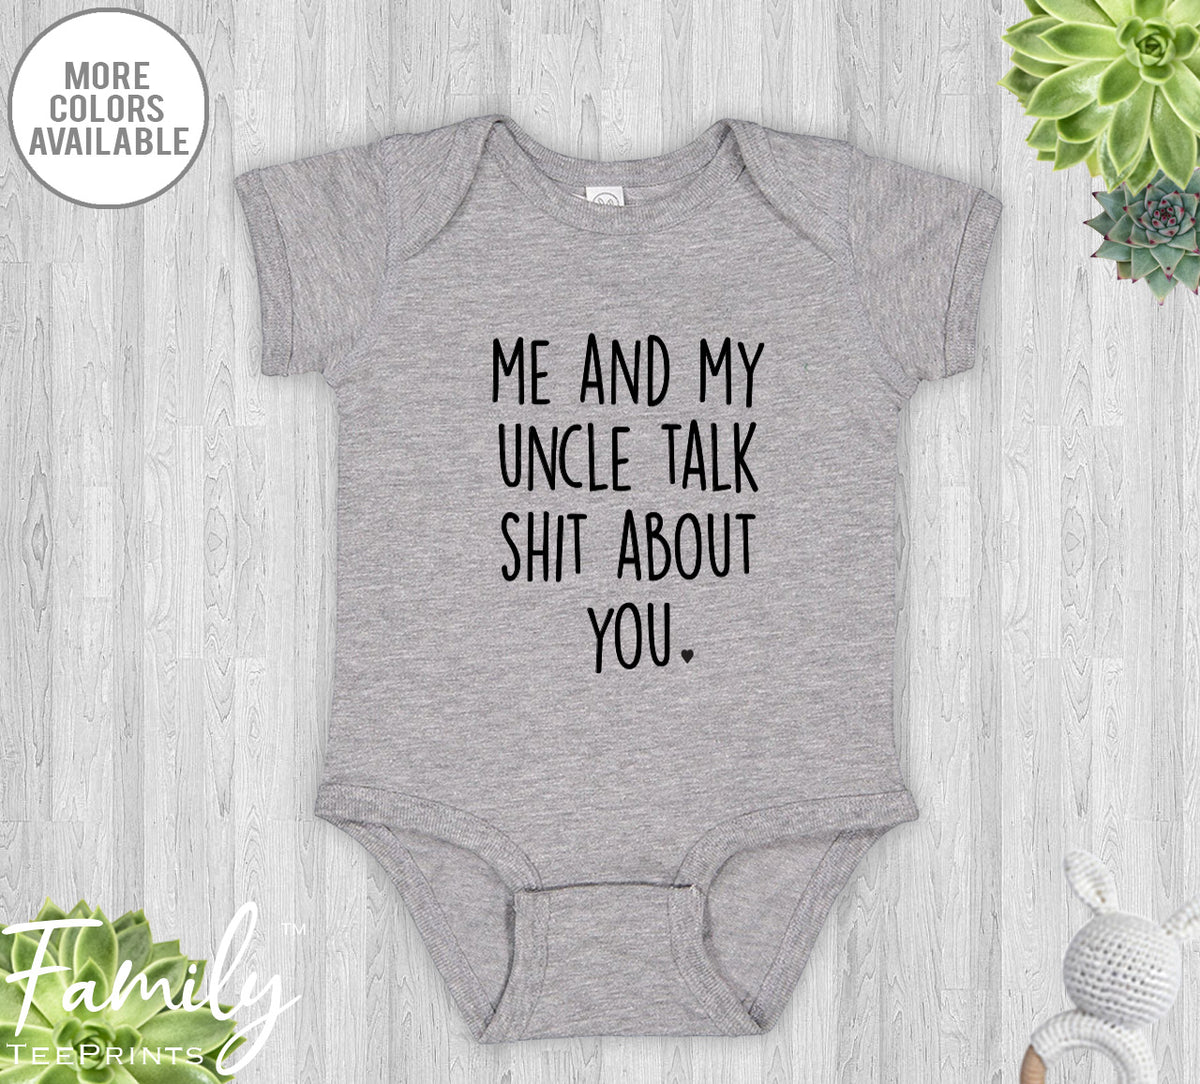 Me And My Uncle Talk Sh*t About You - Baby Onesie - Funny Baby Bodysuit - Baby Gift From Uncle - familyteeprints